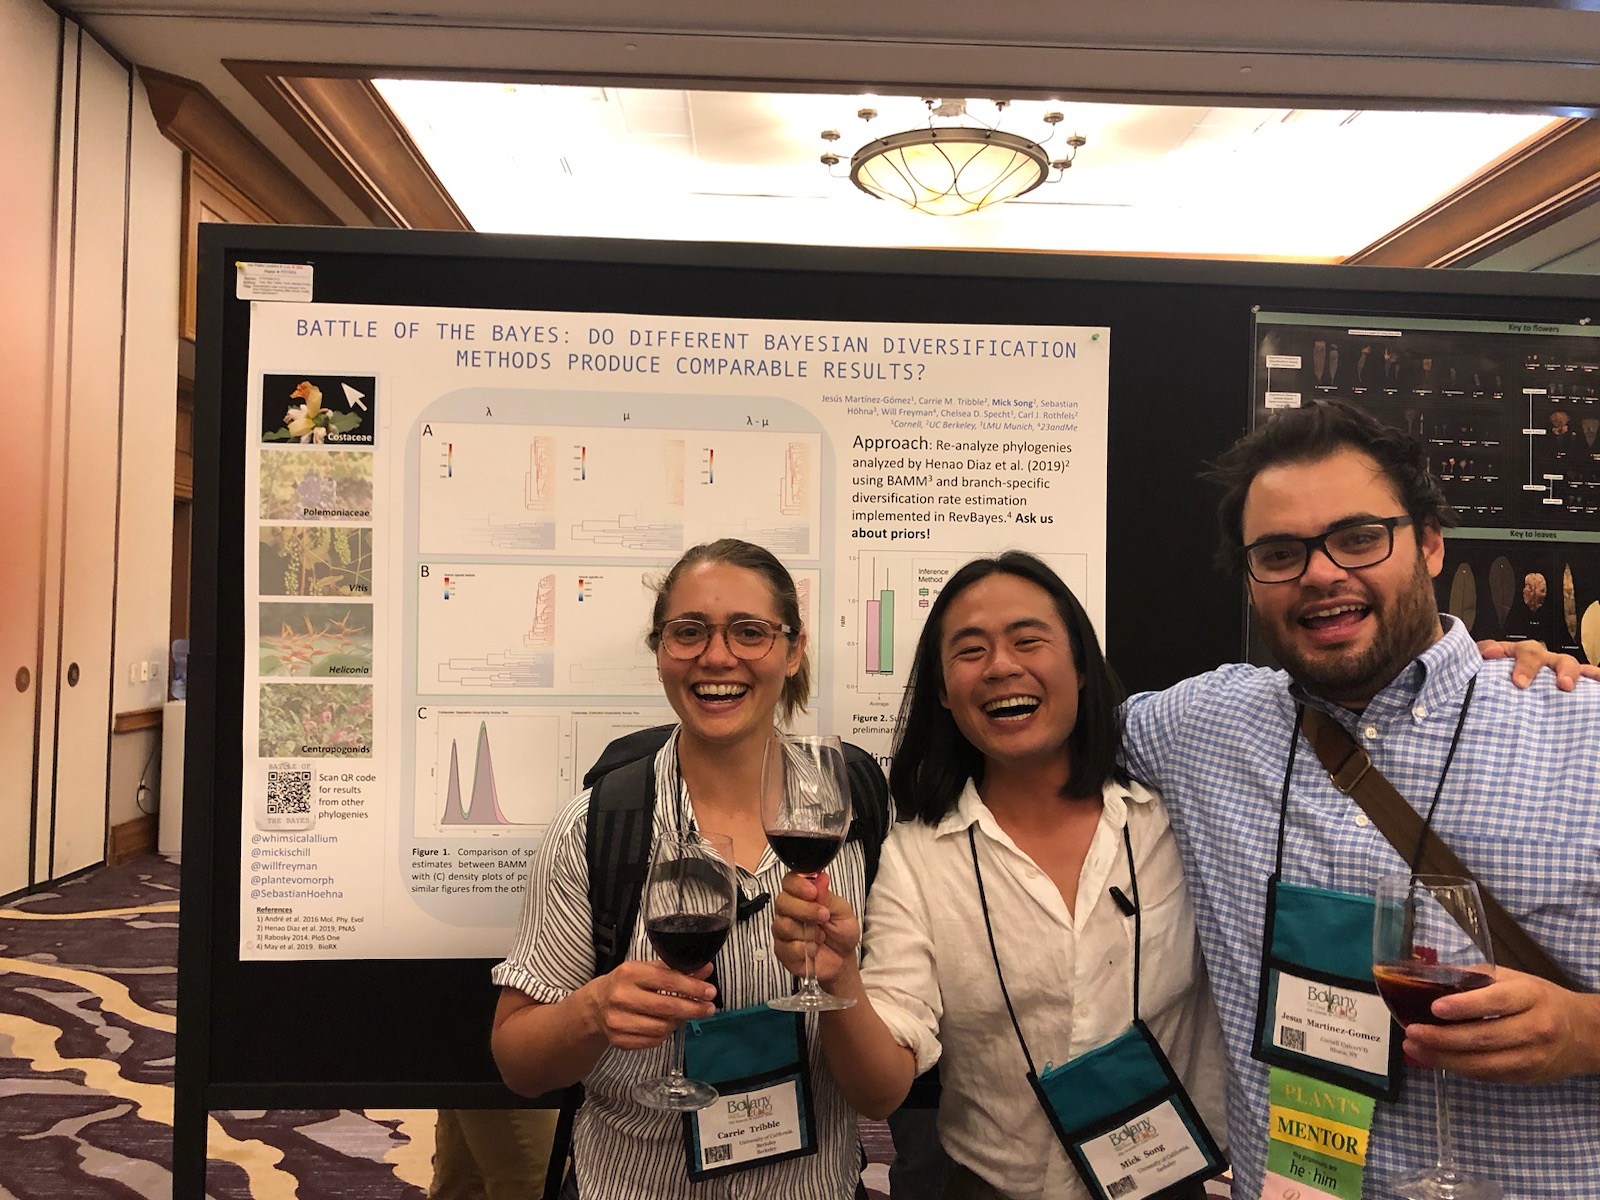 Left to Right: Carrie Tribble, Micheal Song and Jesus. At Botany 2018 in Fort Worth Texas presenting a collaborative poster that just got accepted!